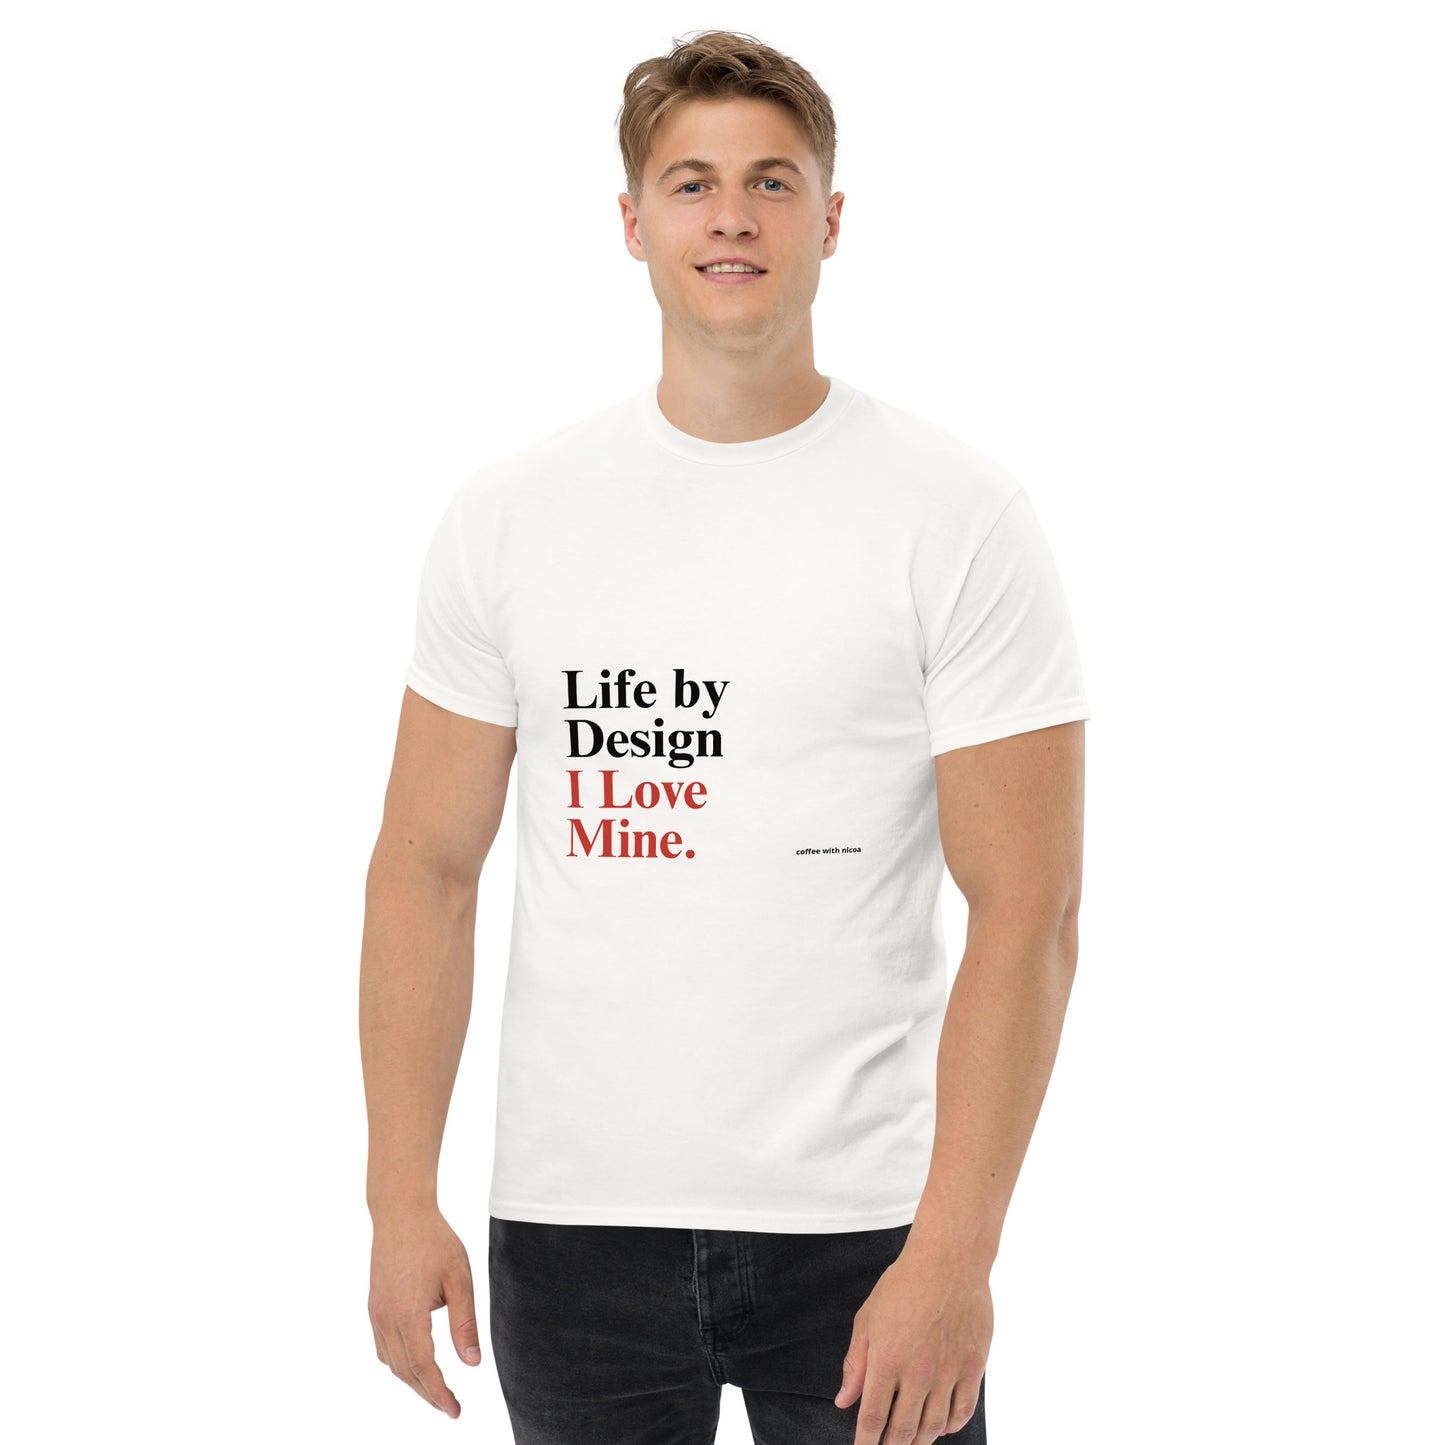 LIFE BY DESIGN Men's classic tee